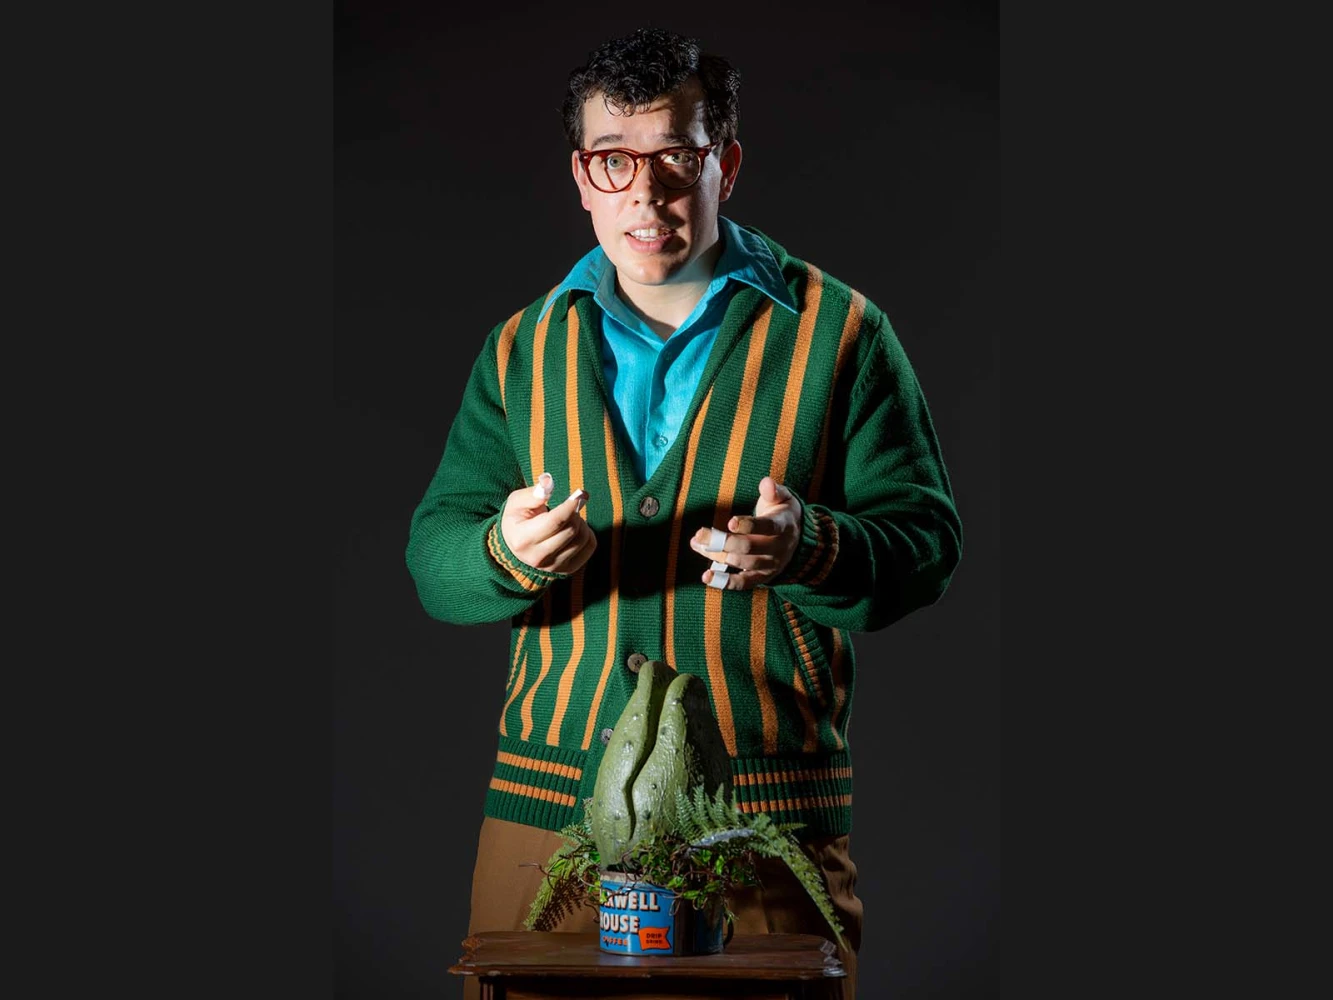 Little Shop of Horrors at Village Theatre Everett: What to expect - 2